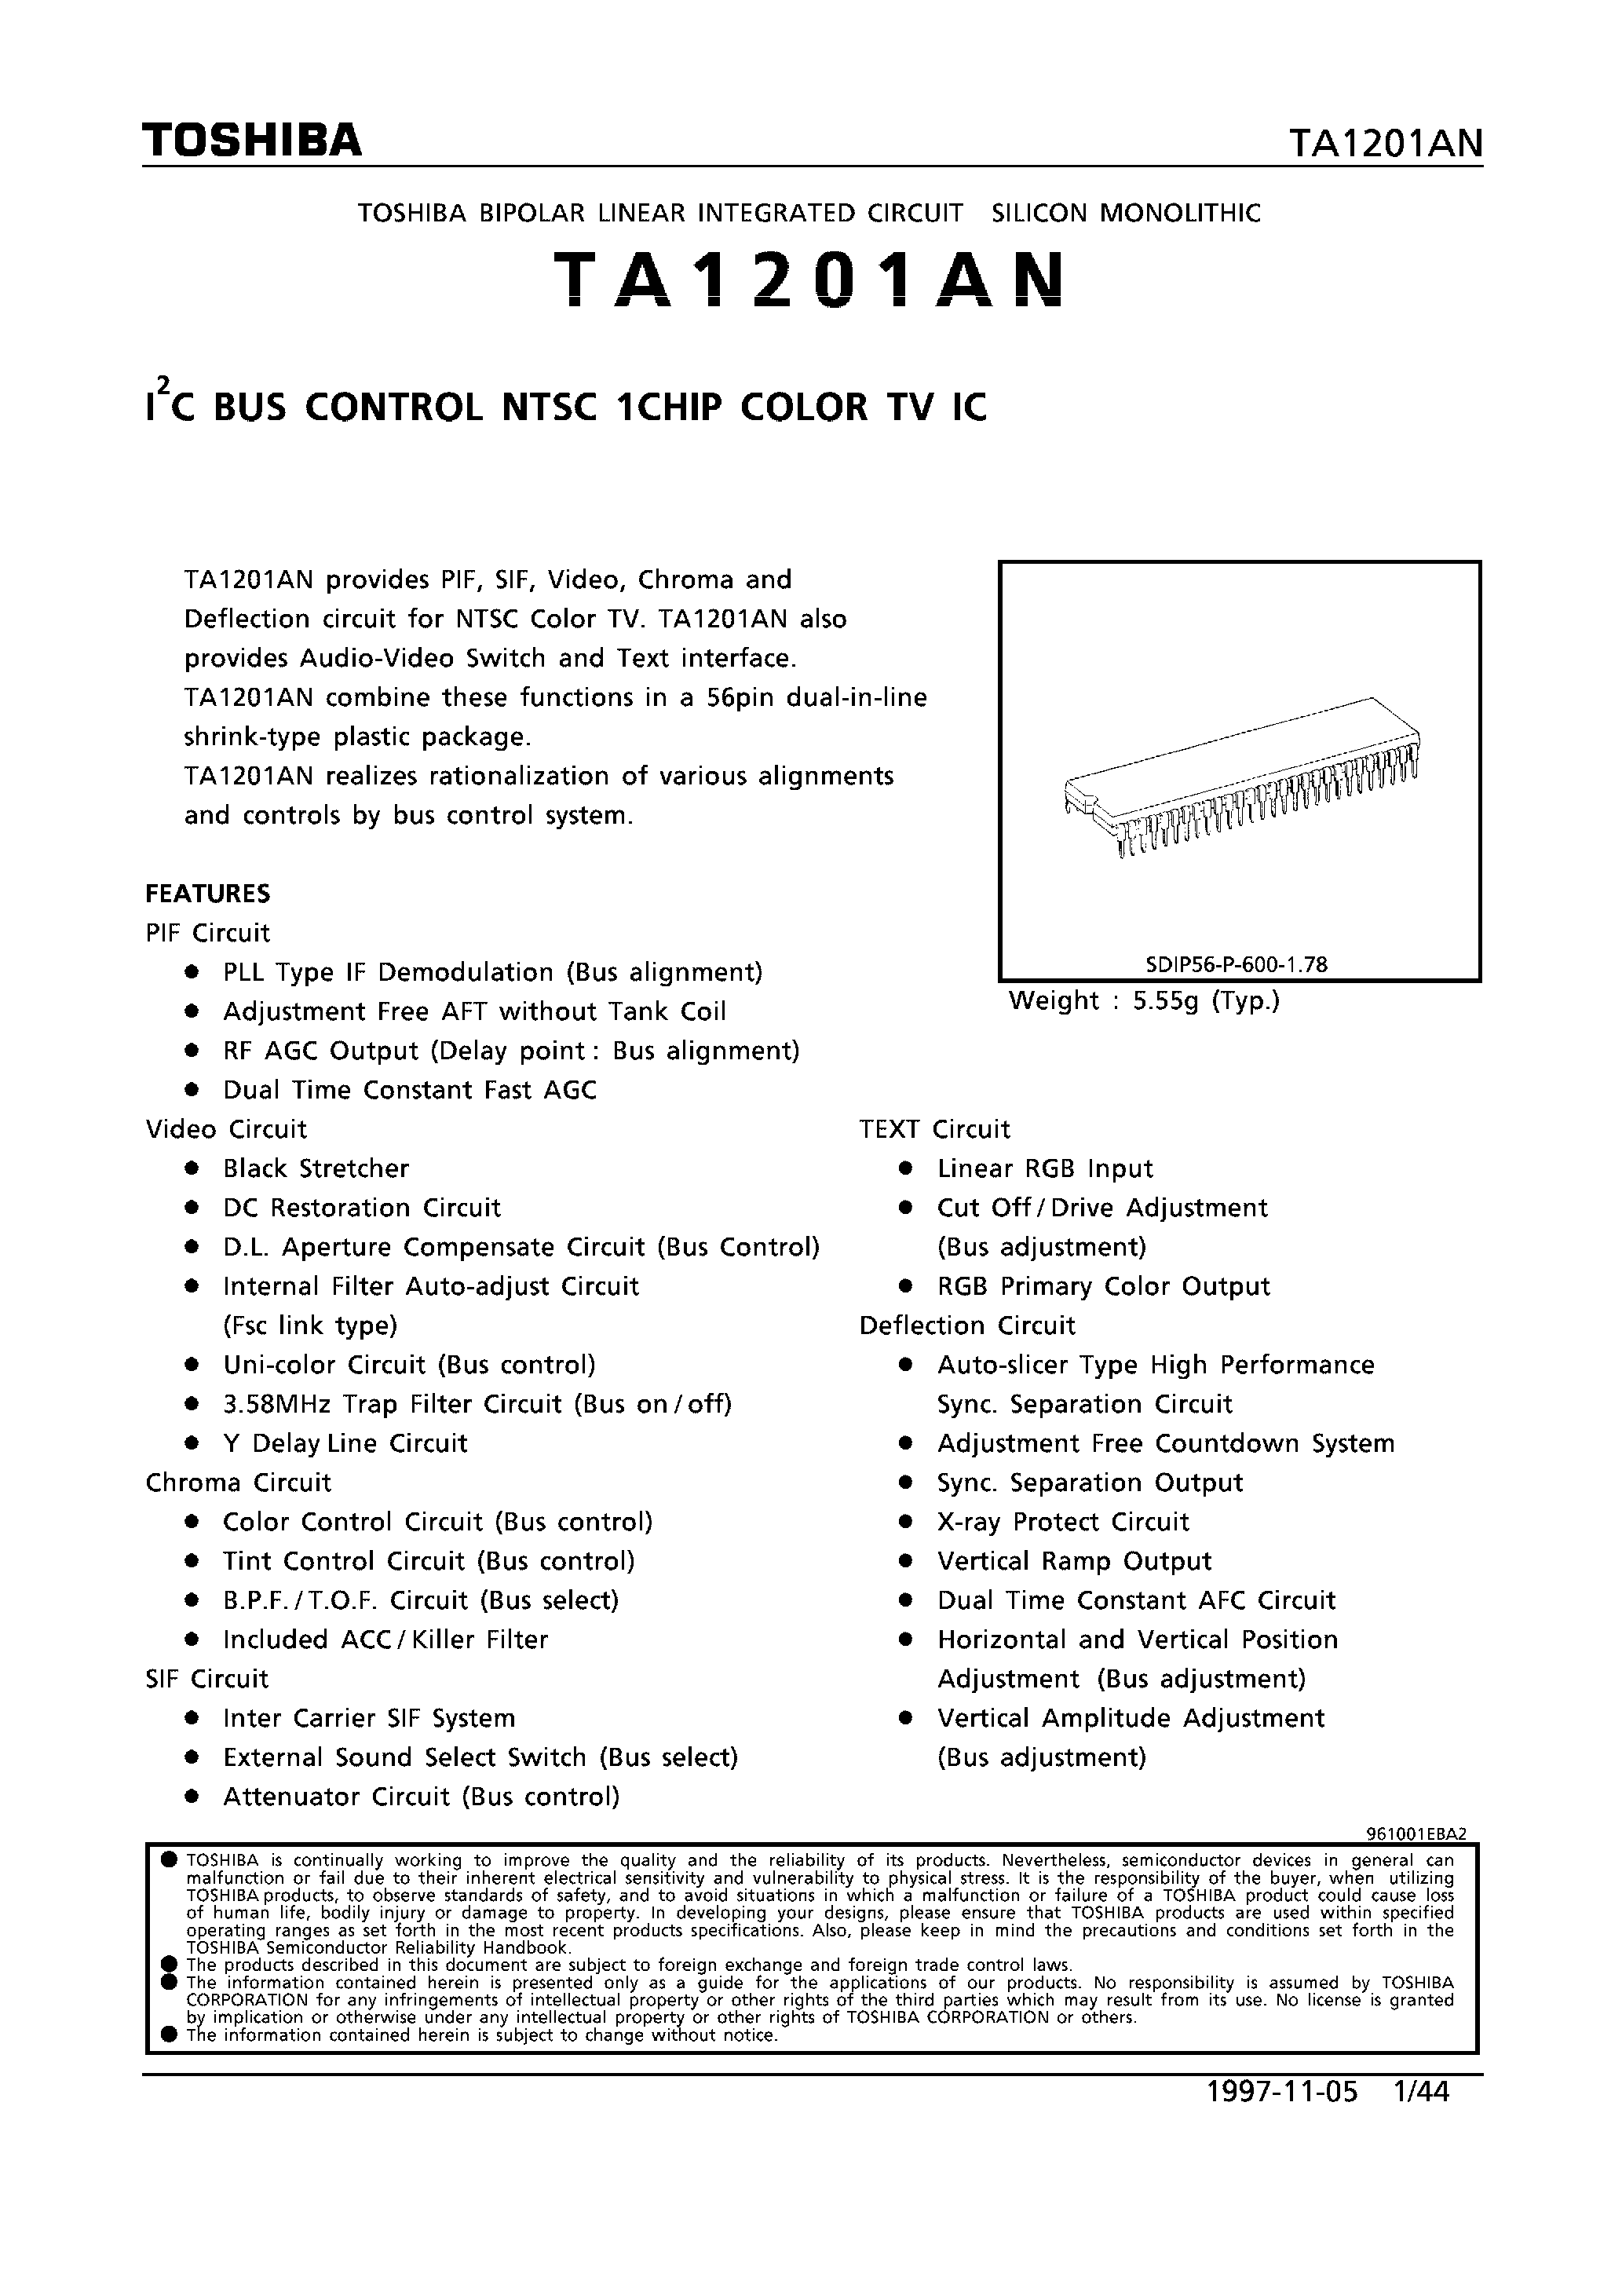 Datasheet TA1201AN - I2C BUS CONTROL NTSC 1CHIP COLOR TV IC page 1